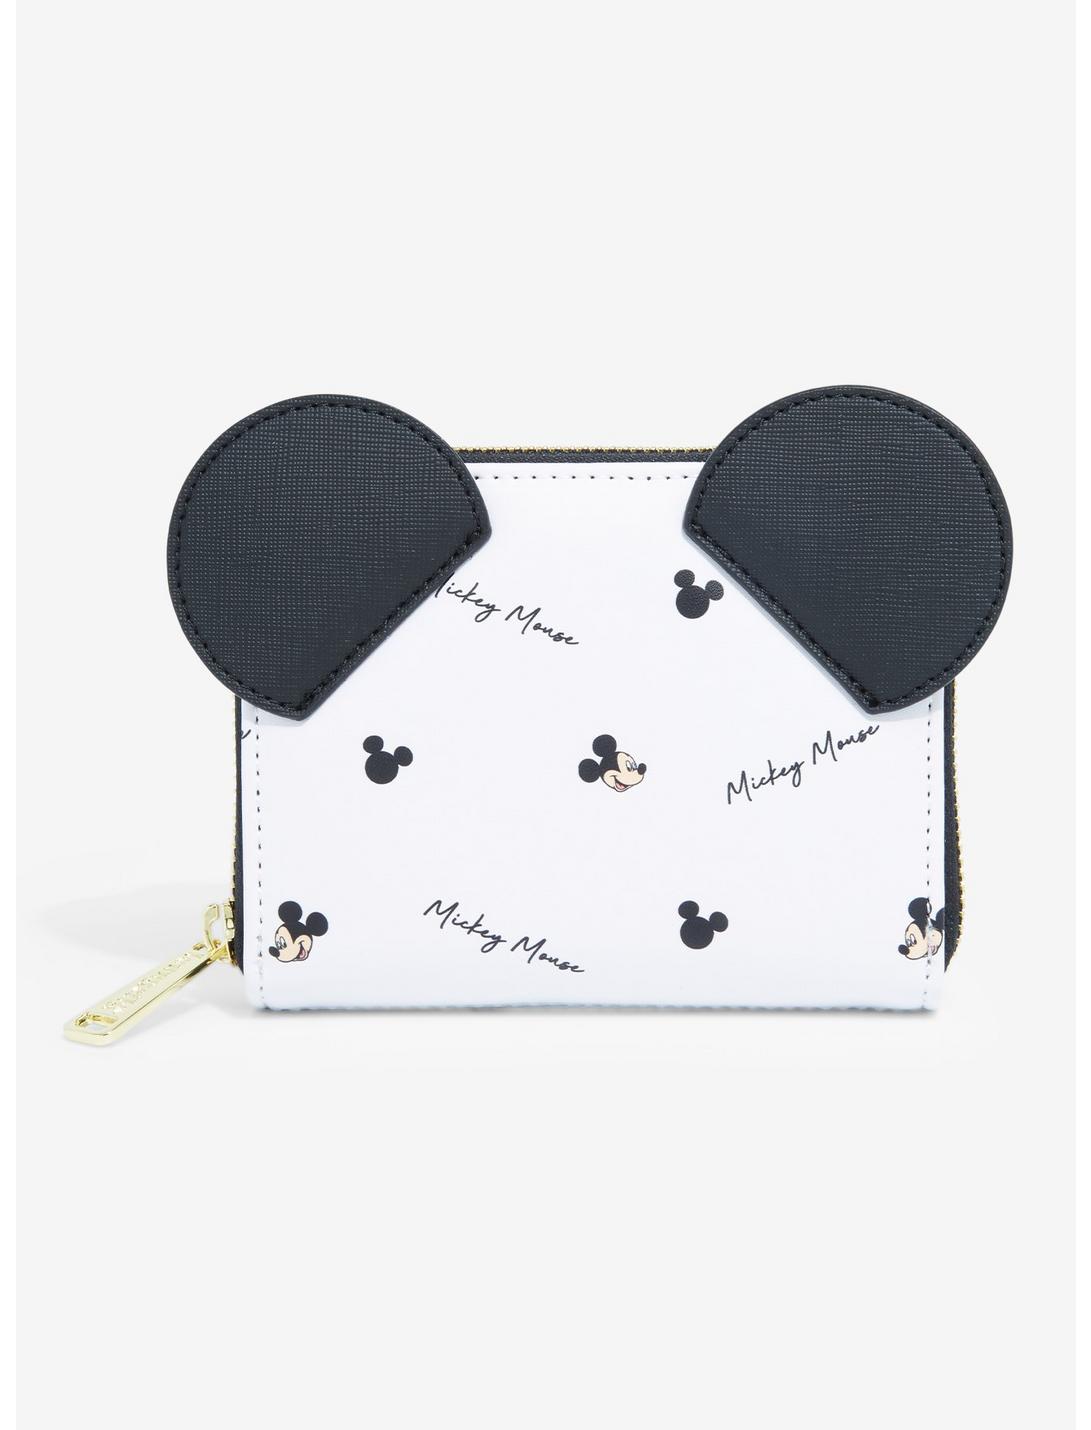 Loungefly Disney Mickey Mouse Signature Allover Print Small Zippered Wallet - BoxLunch Exclusive, , hi-res